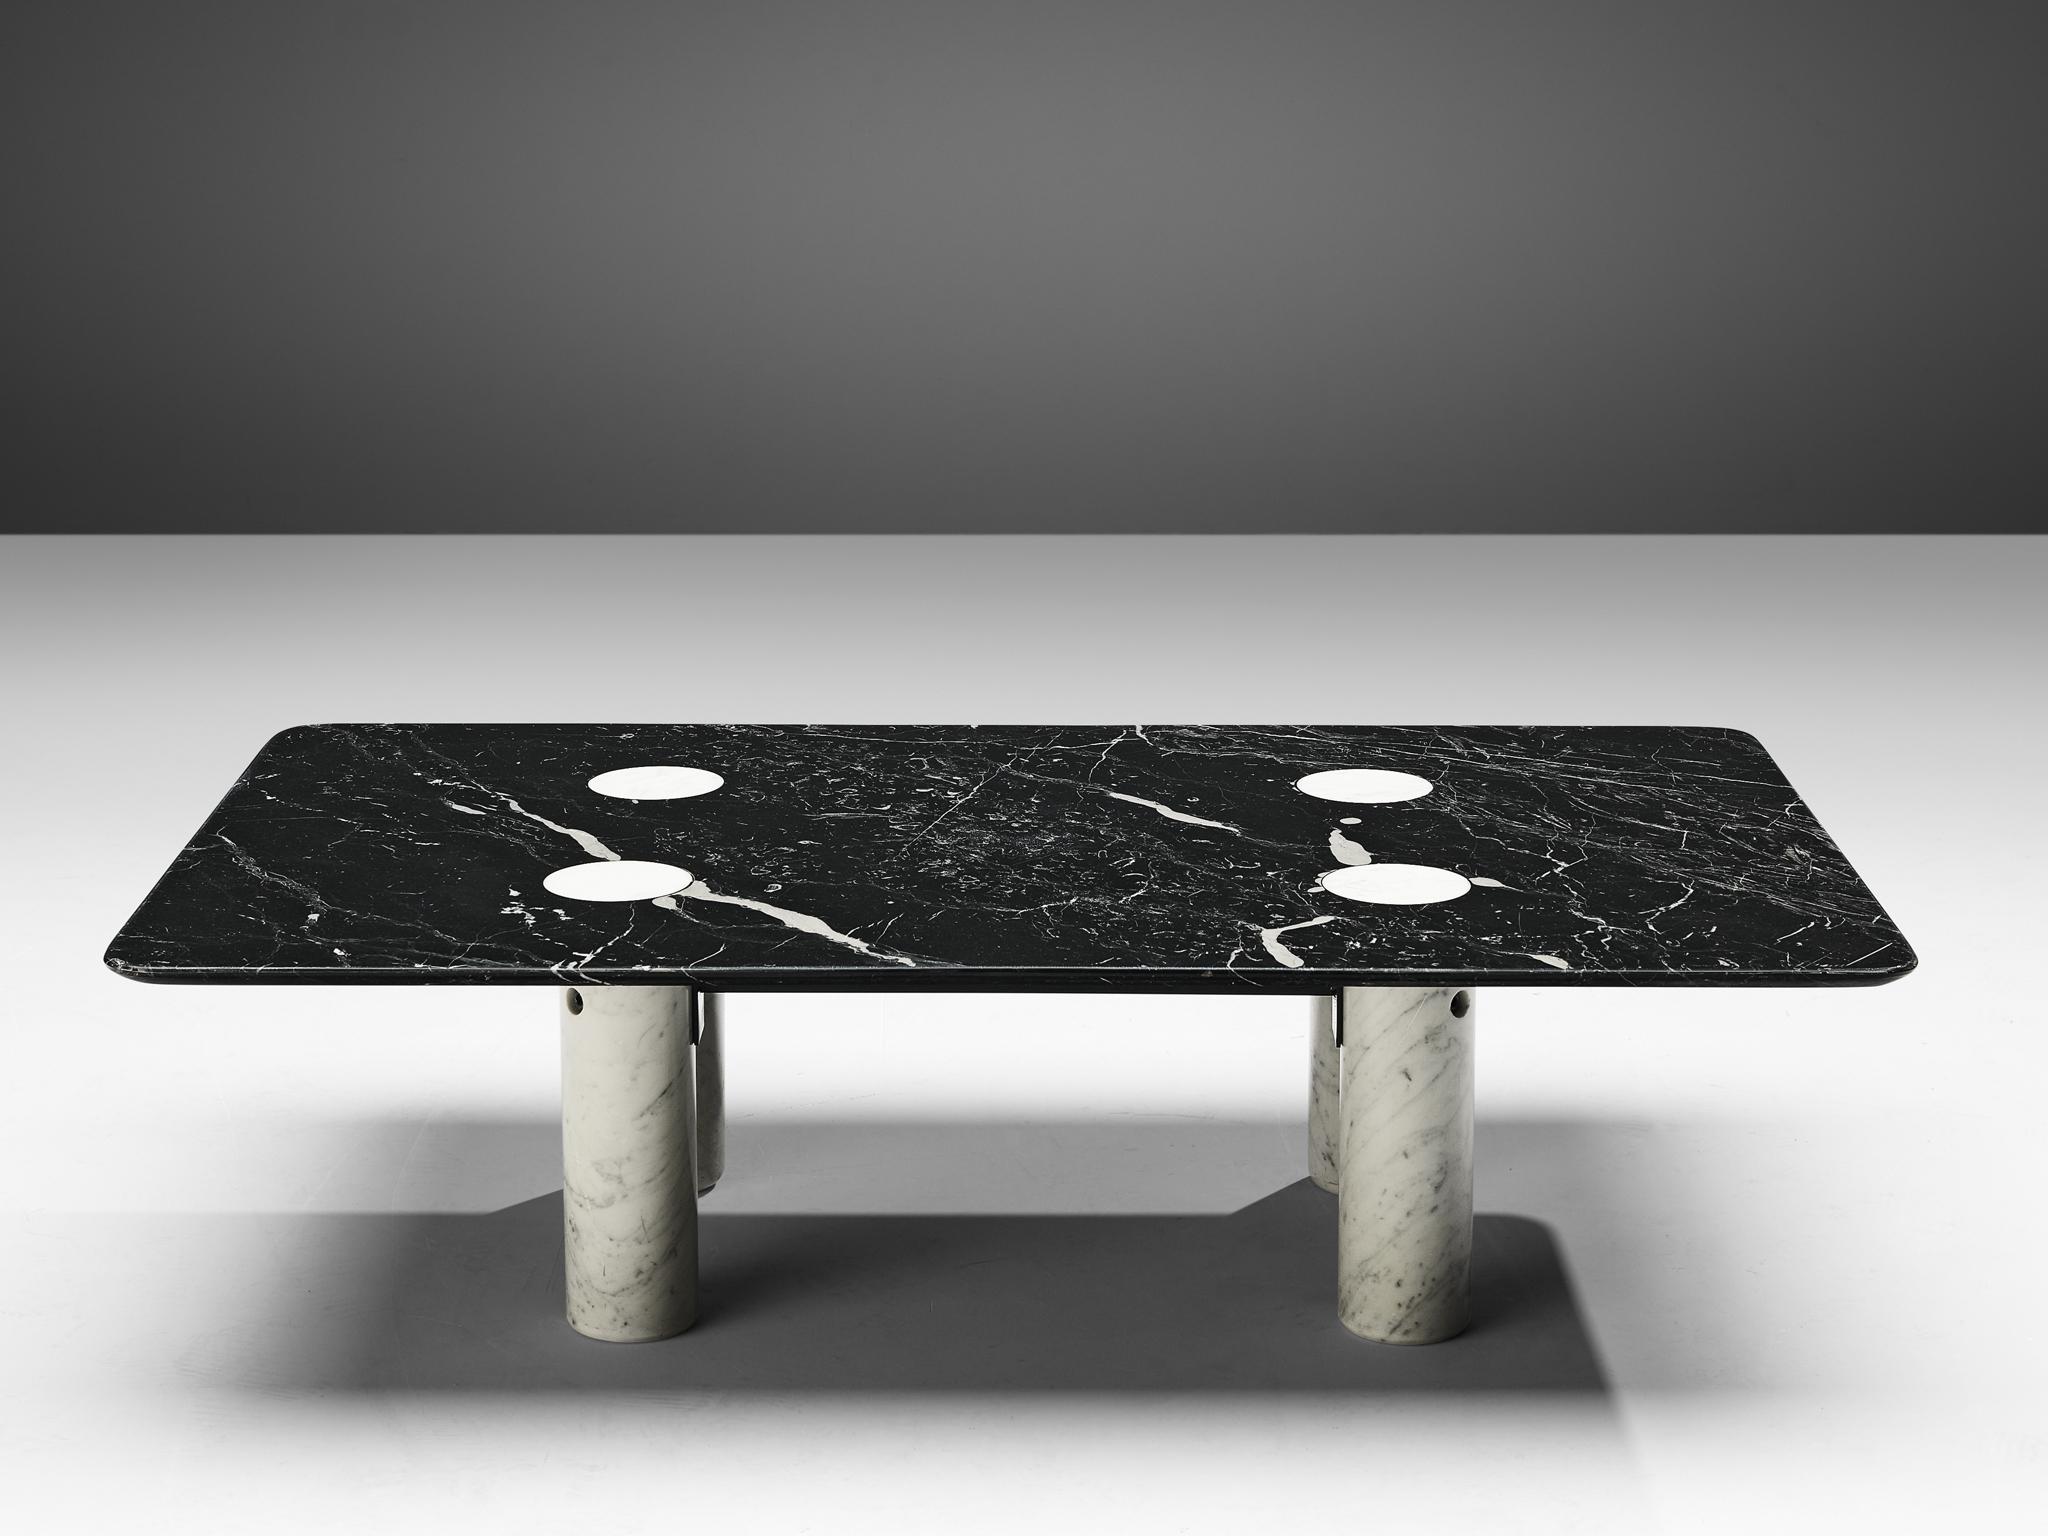 Coffee table, white marble, black marquina marble, metal, Europe, 1970s.

This sculptural side table is a skillful example of postmodern design. The square table has a black marble table top with rounded edges and four white marble cylinder shaped